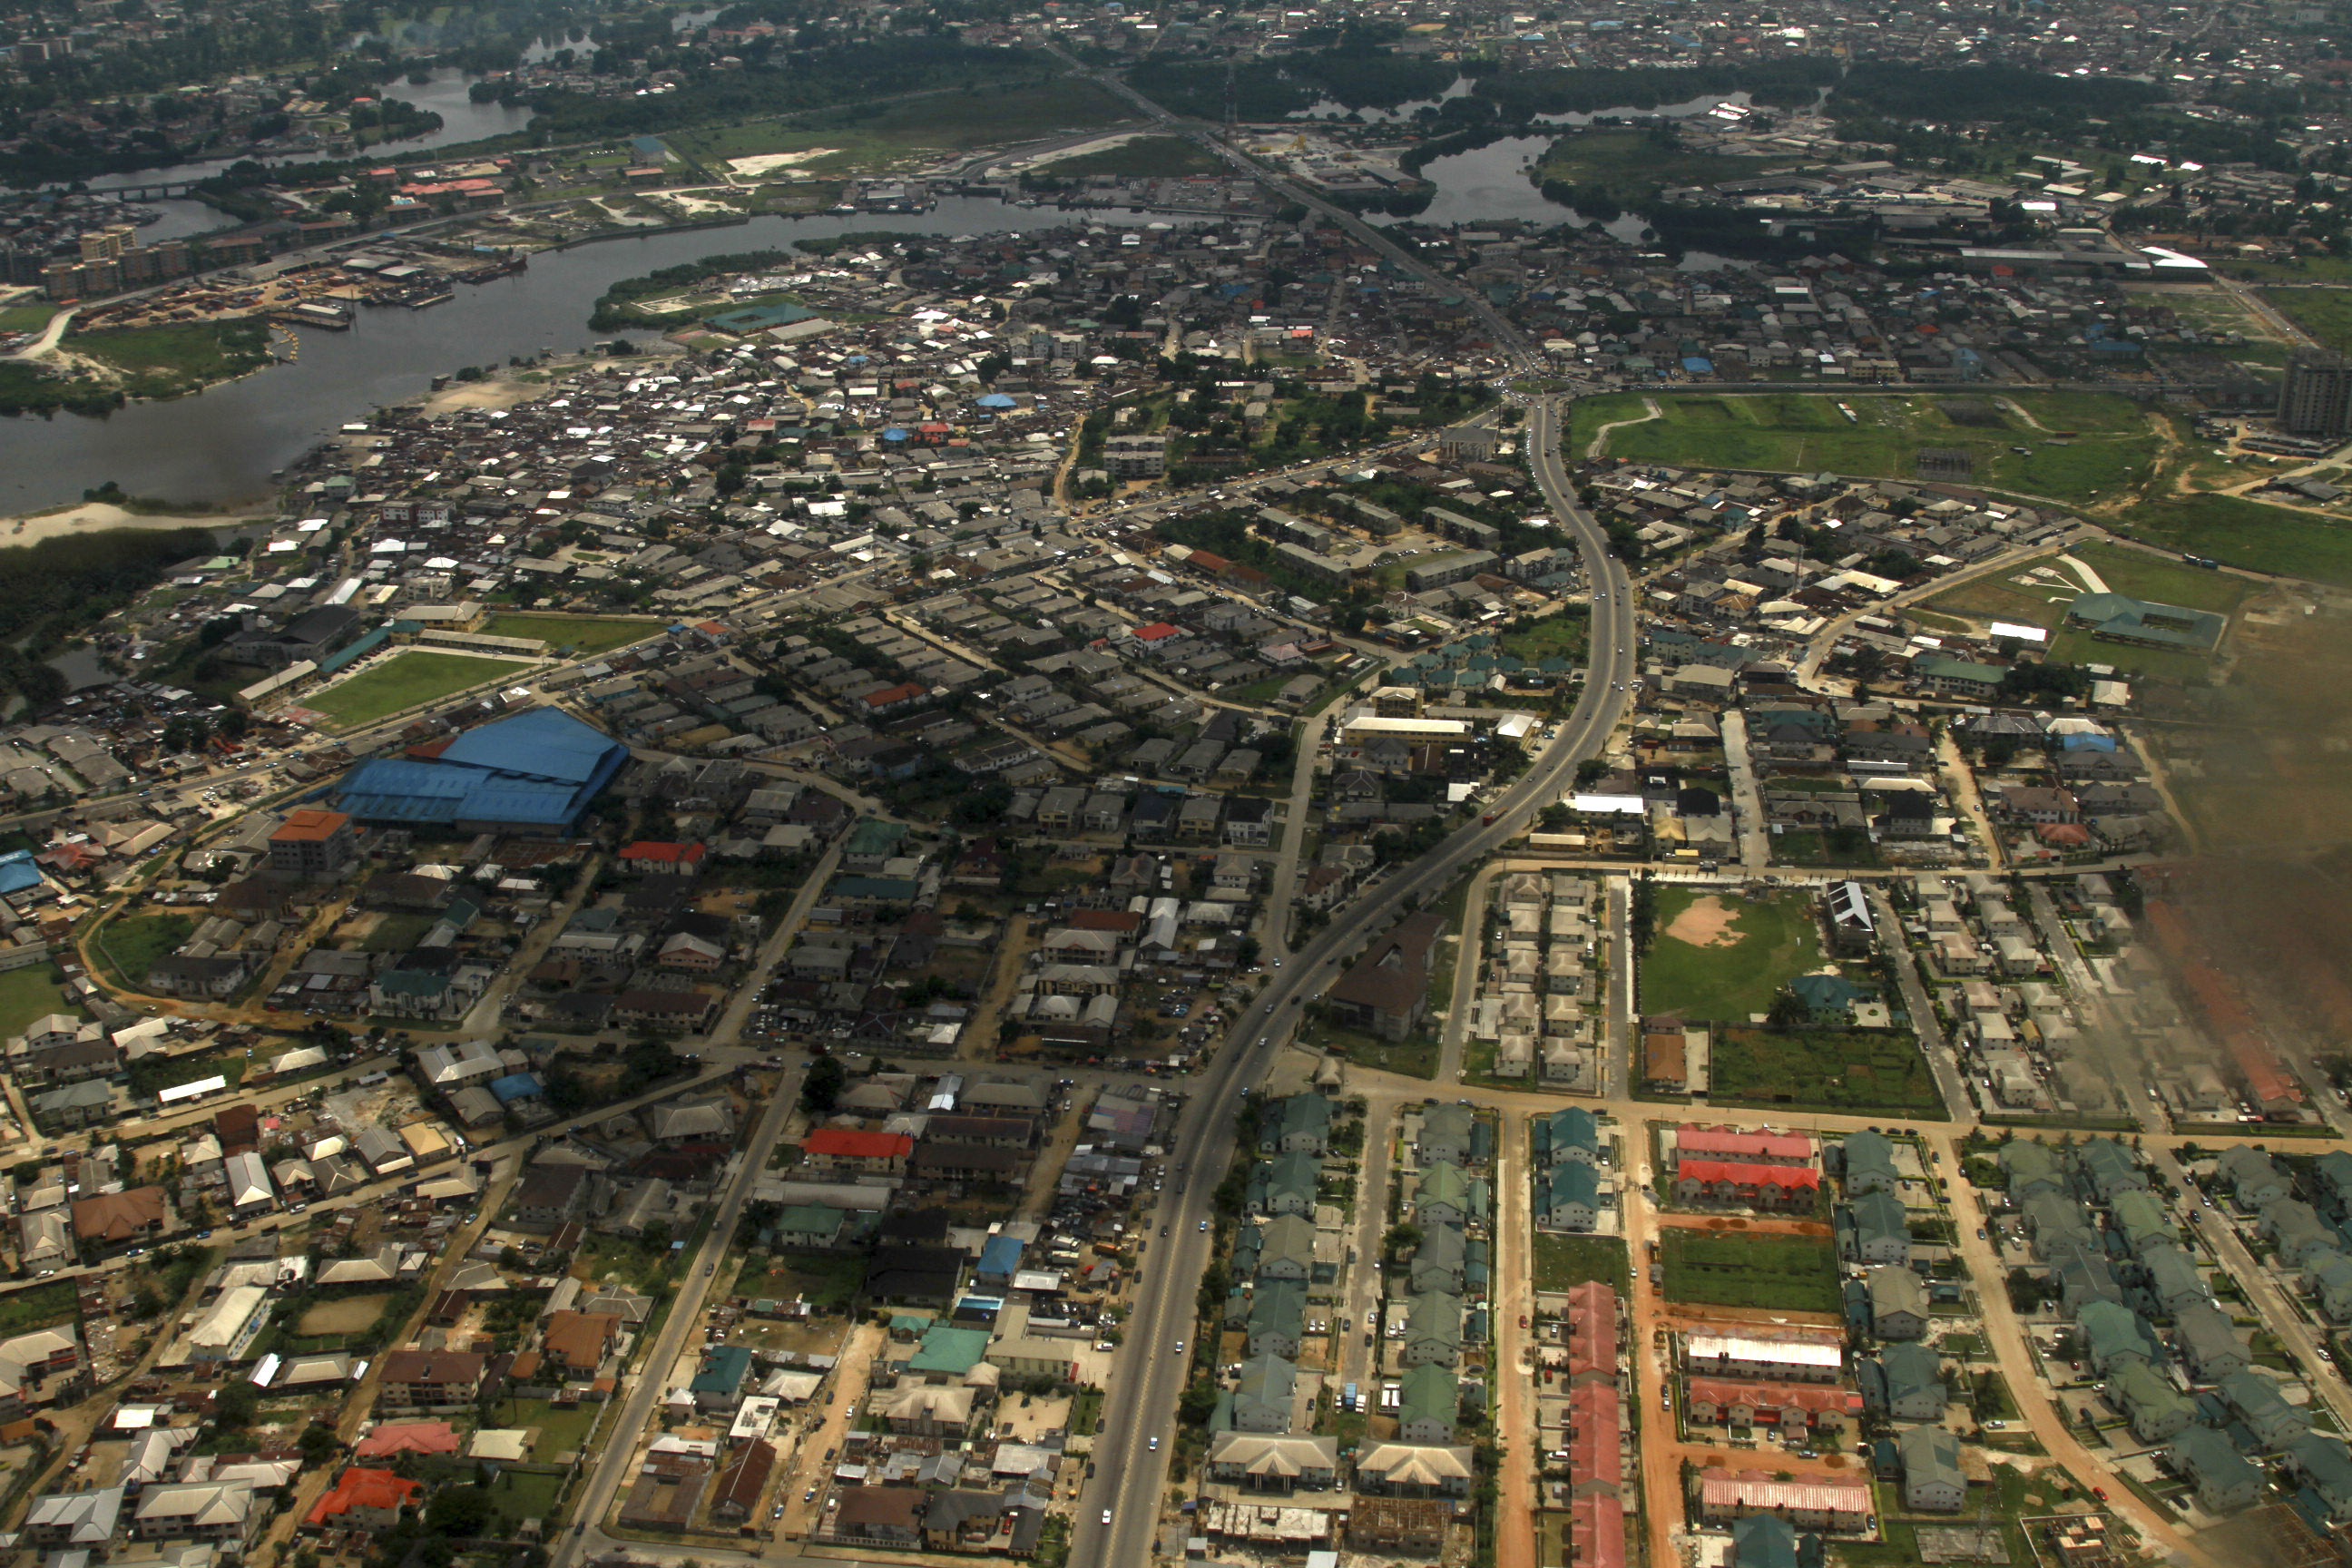 An aerial view of the oil hub city Port Harcourt in Nigeria's Delta region